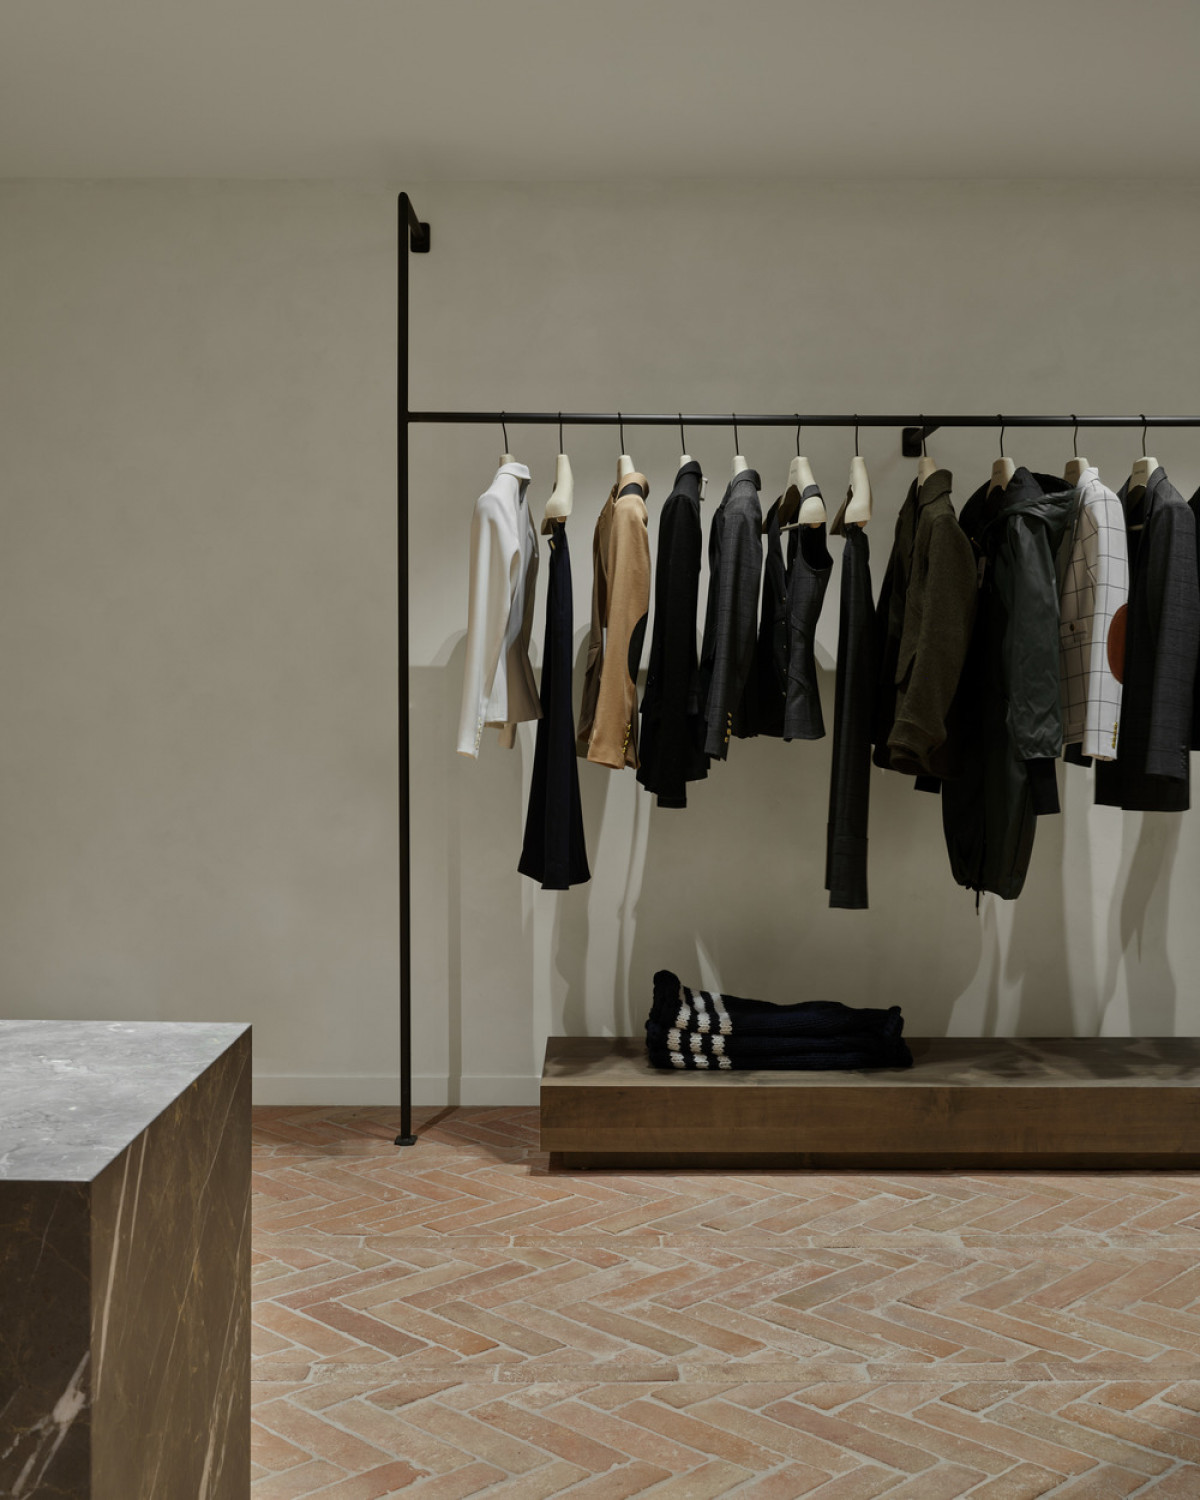 Rectangular volumes at each clothing rack's base help frame to the garments.